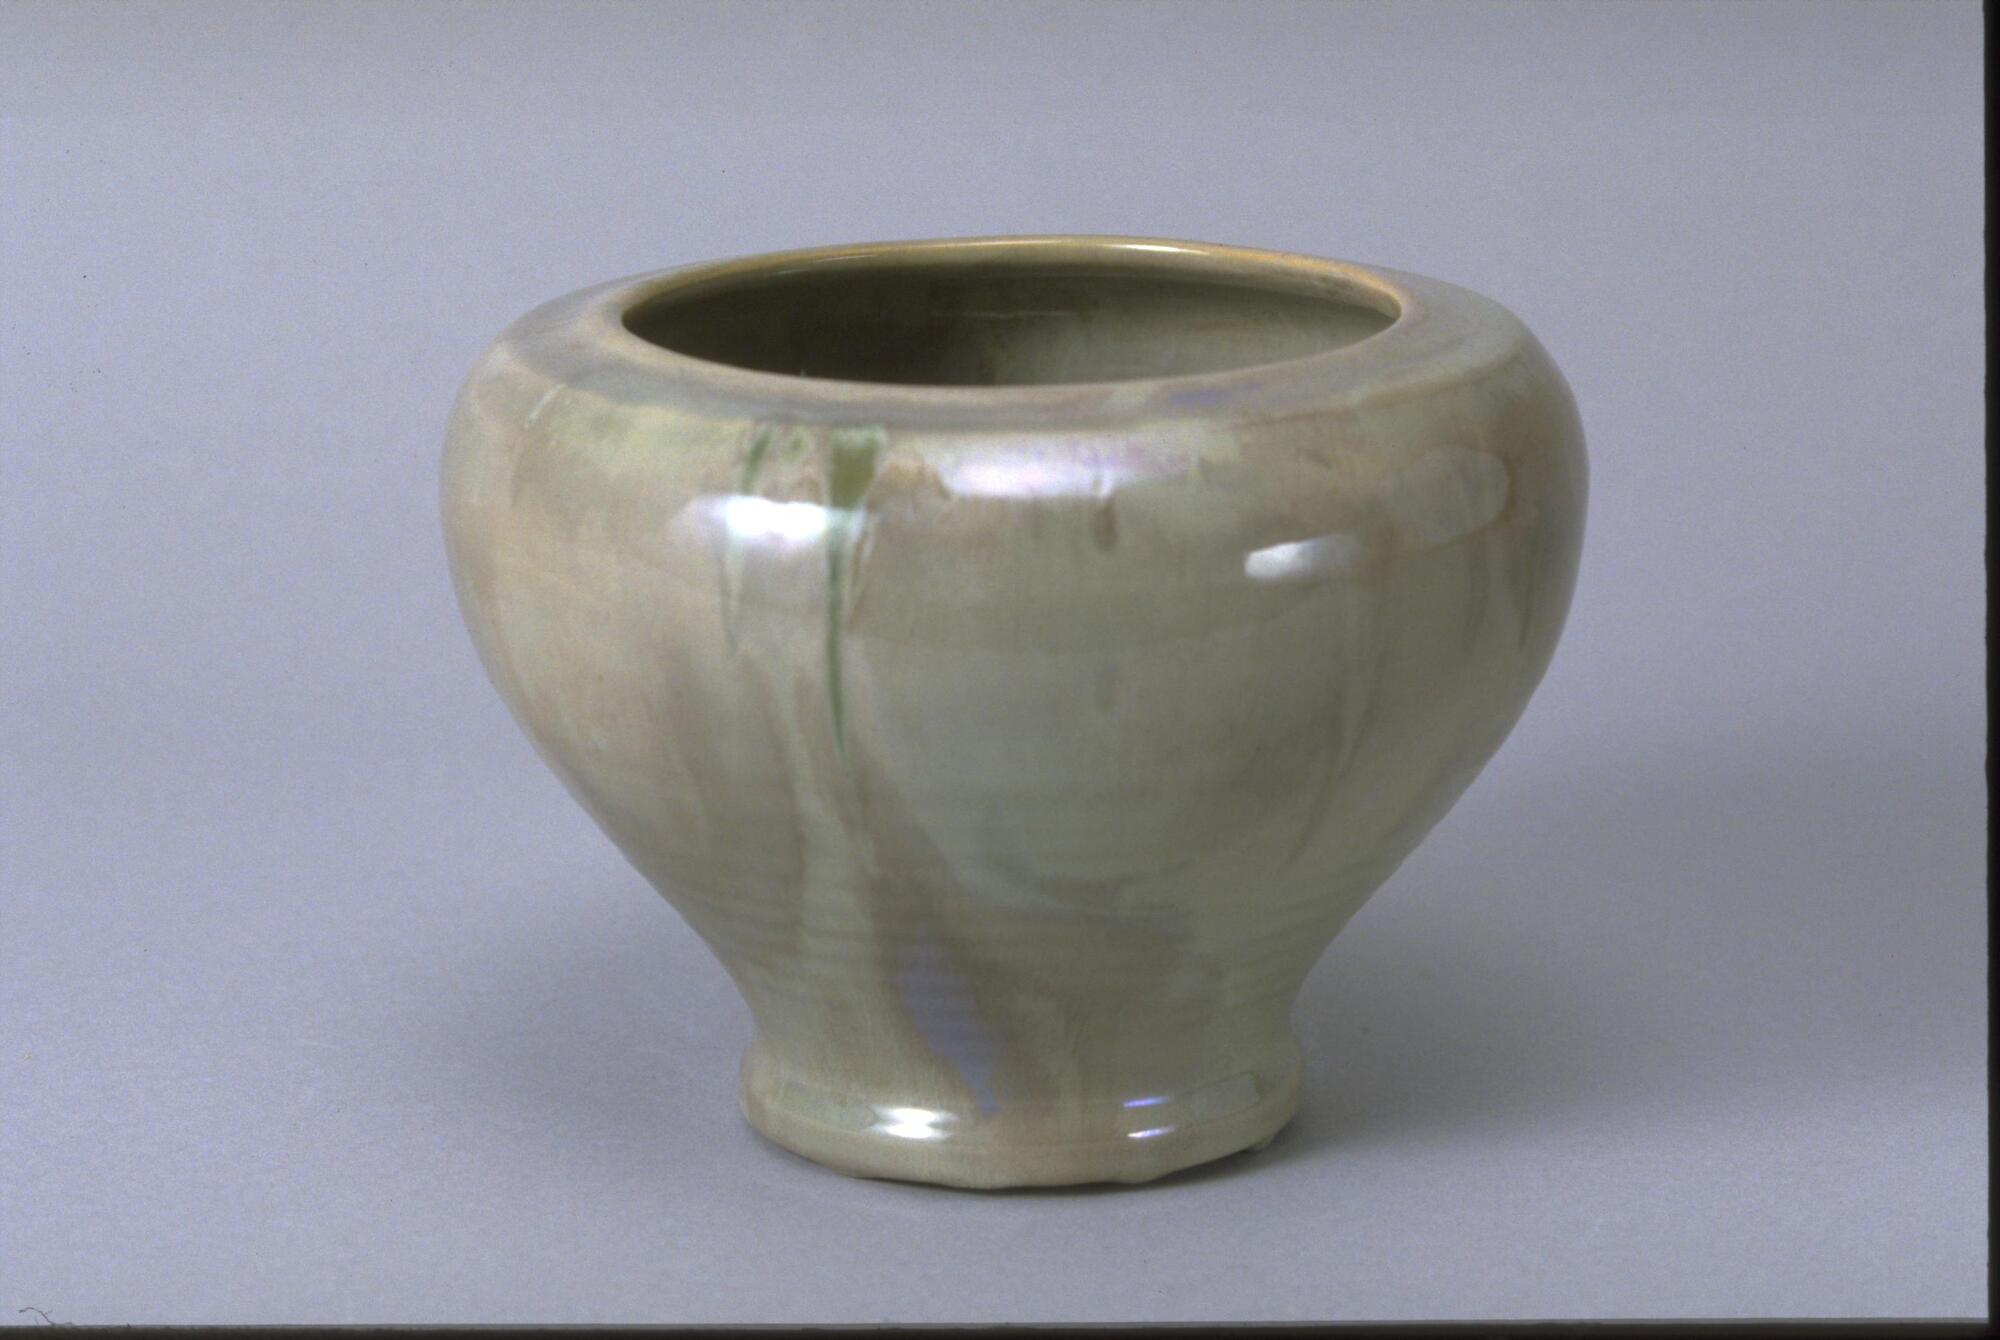 Ceramic vessel with rounded shoulder, large mouth and no neck or lip covered with heather green-gray glaze. The rings of the thrown clay can be seen beneath the glaze.